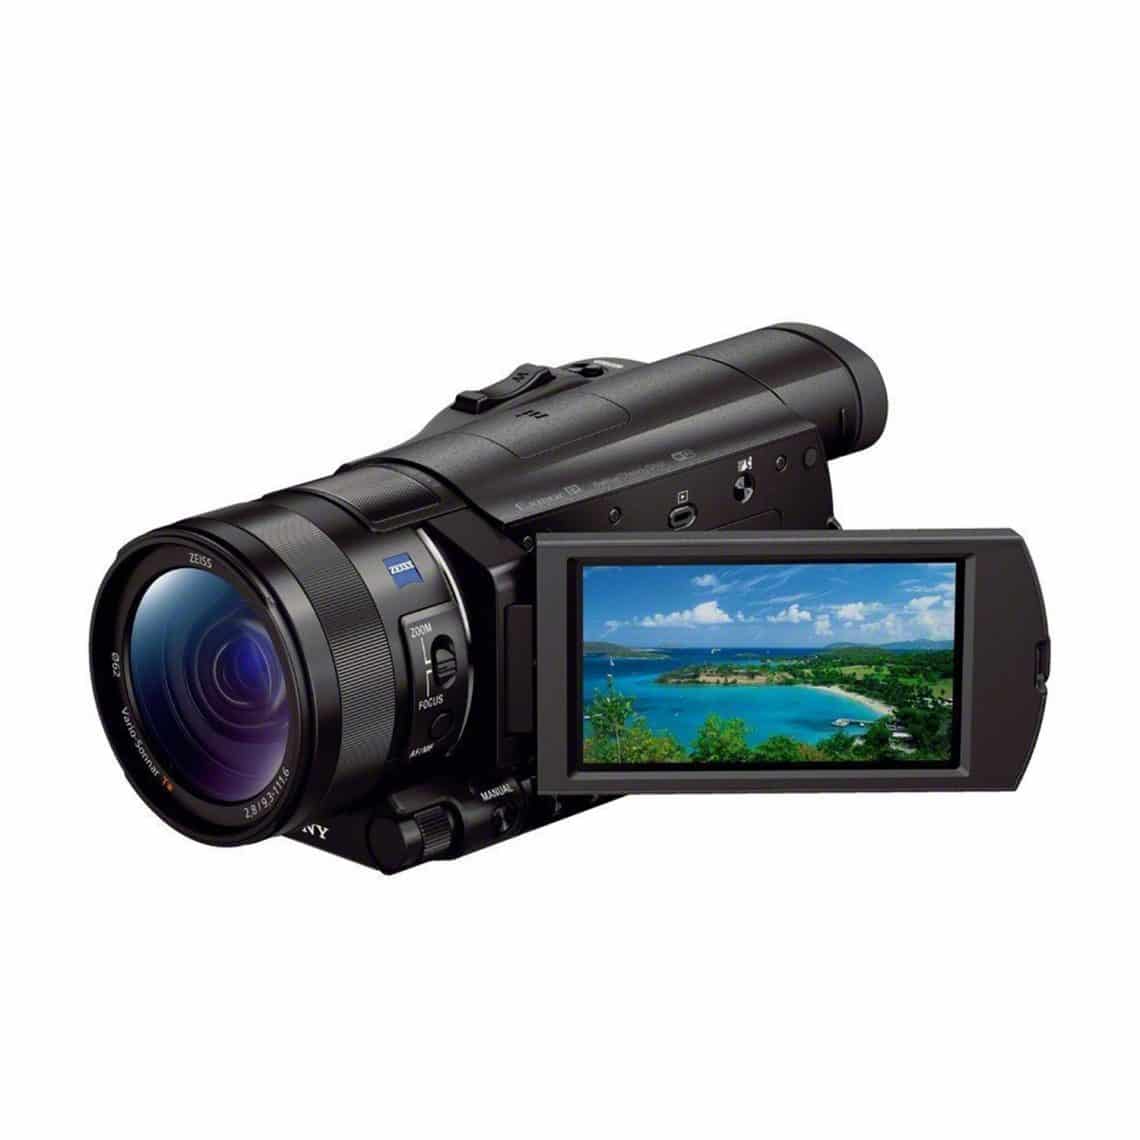 Top 10 Best Professional Camcorders in 2023 Reviews & Buyer’s Guide